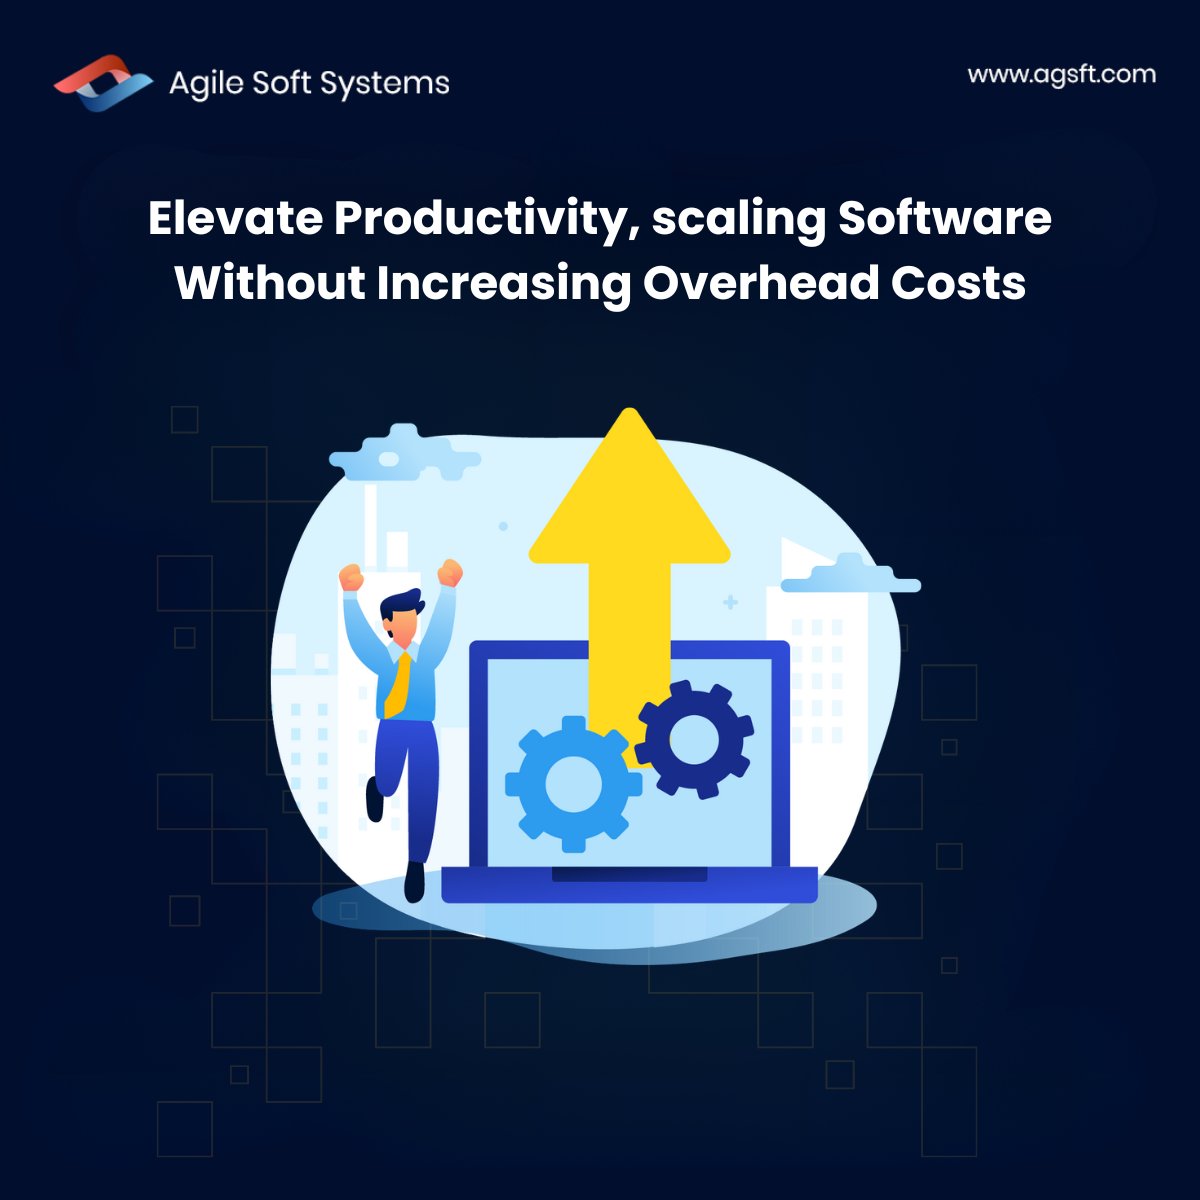 Grow without burdens. Agile Soft Systems scales your software efficiently, without extra costs. We handle the tech, you focus on business growth

Know more: agsft.com/contact/

#SoftwareScaling #CostEfficiency #OverheadReduction #BusinessGrowth #ScalableSolutions